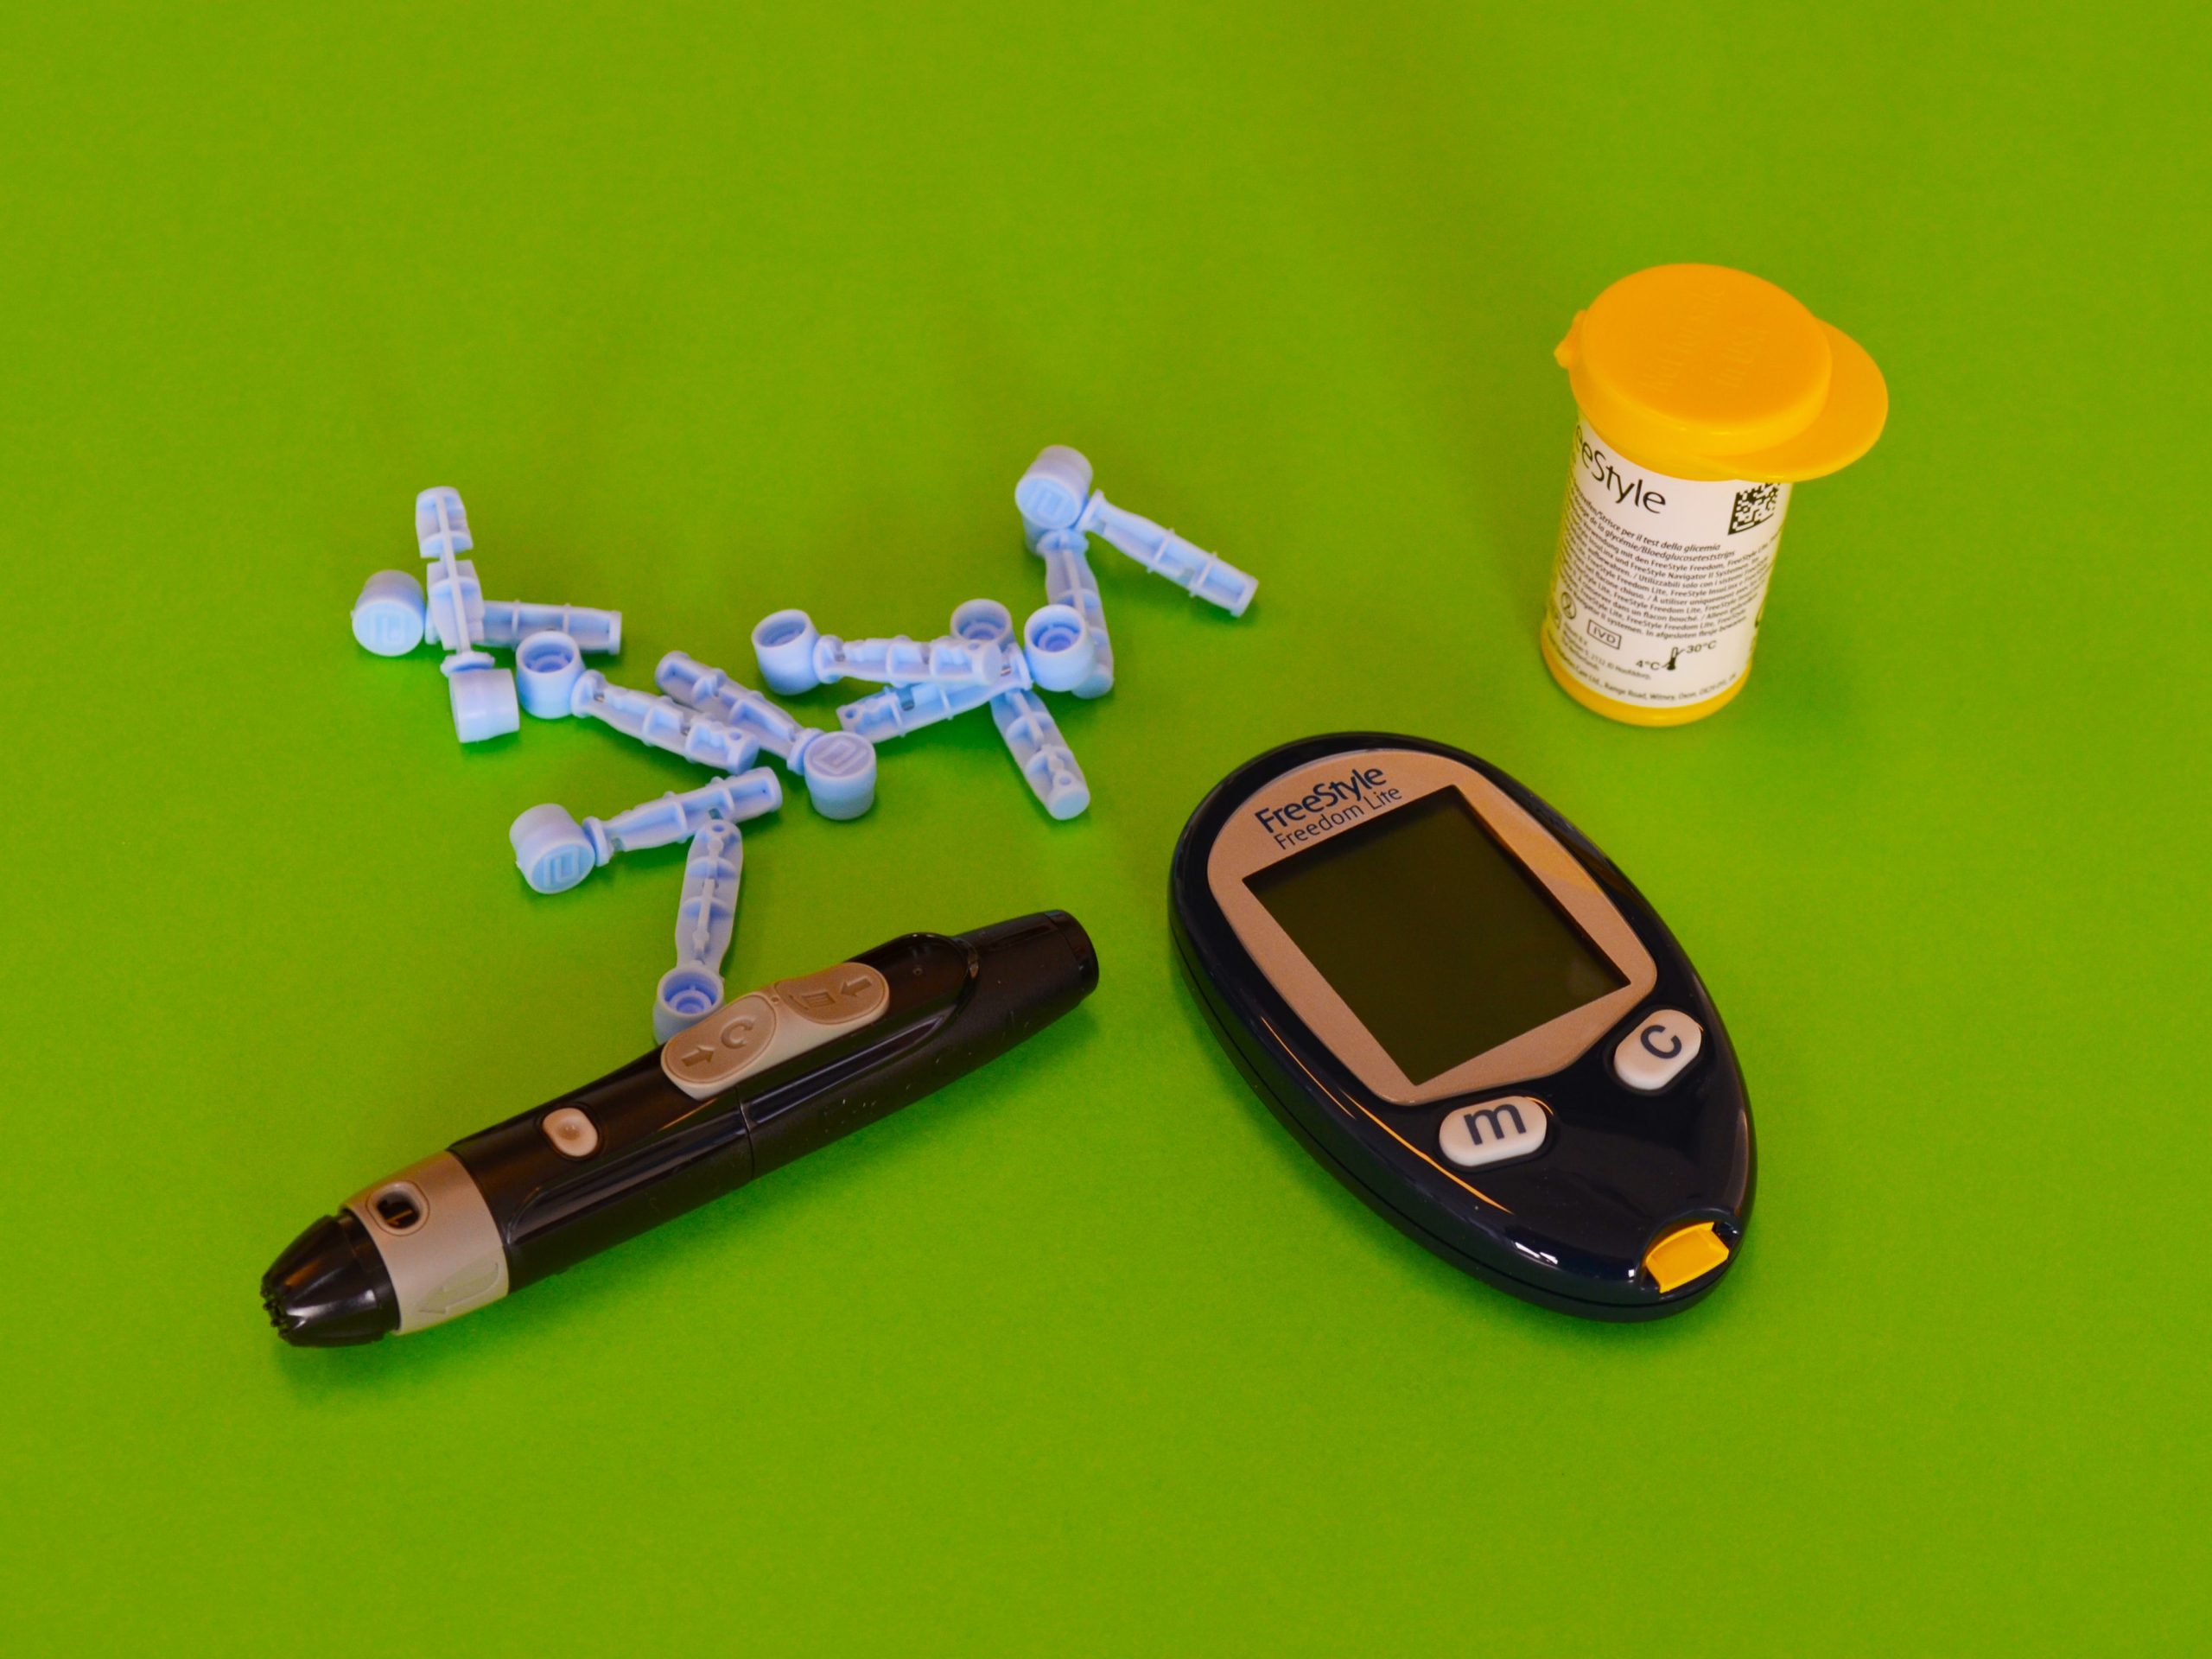 Living with diabetes is already challenging enough, but the risk of amputation can make it even more daunting. Diabetes is a chronic condition that affects how your body uses glucose or blood sugar, and it can lead to serious health complications, including amputations. This article aims to explore the connection between diabetes and amputation risk, how to prevent amputations, and helpful tips for individuals living with diabetes.